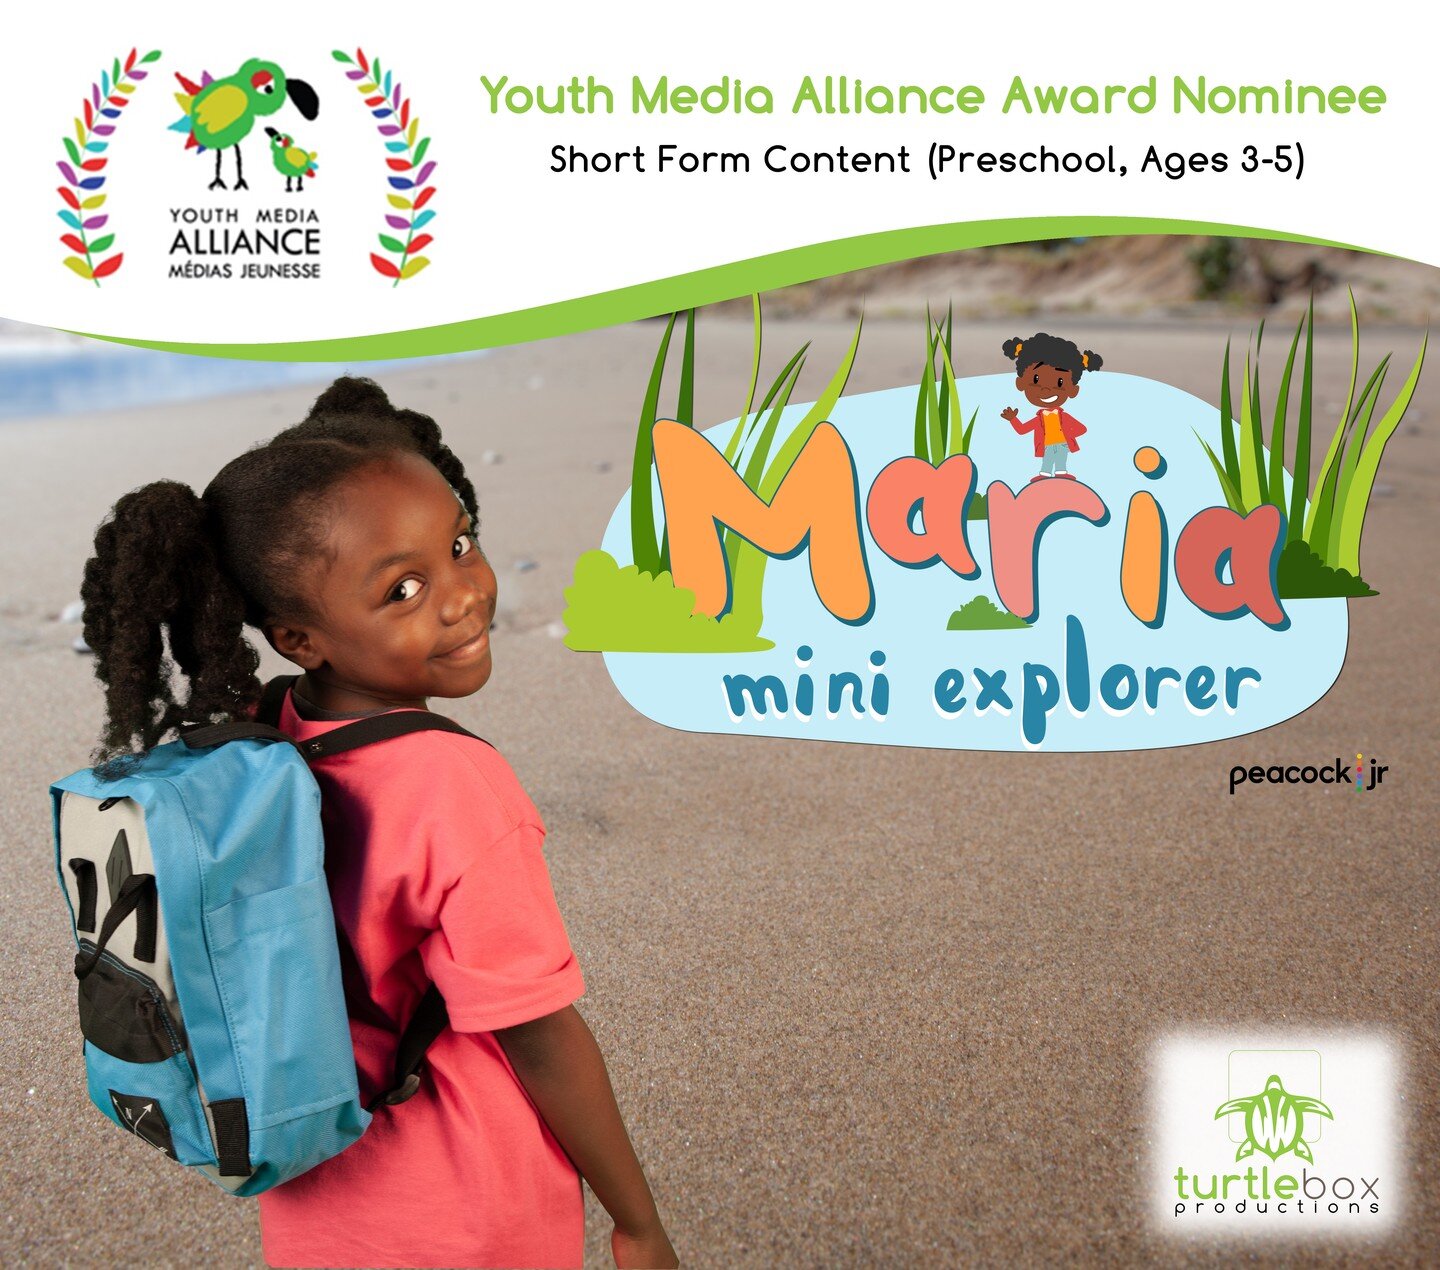 We&rsquo;re excited to be nominated for a @ymamj award for our short series, Maria Mini Explorer.
Honored to be nominated alongside some of our Canadian industry pals like @headspinnerprod &amp; @imagine_create_media 
Shout out to the folks at Peacoc